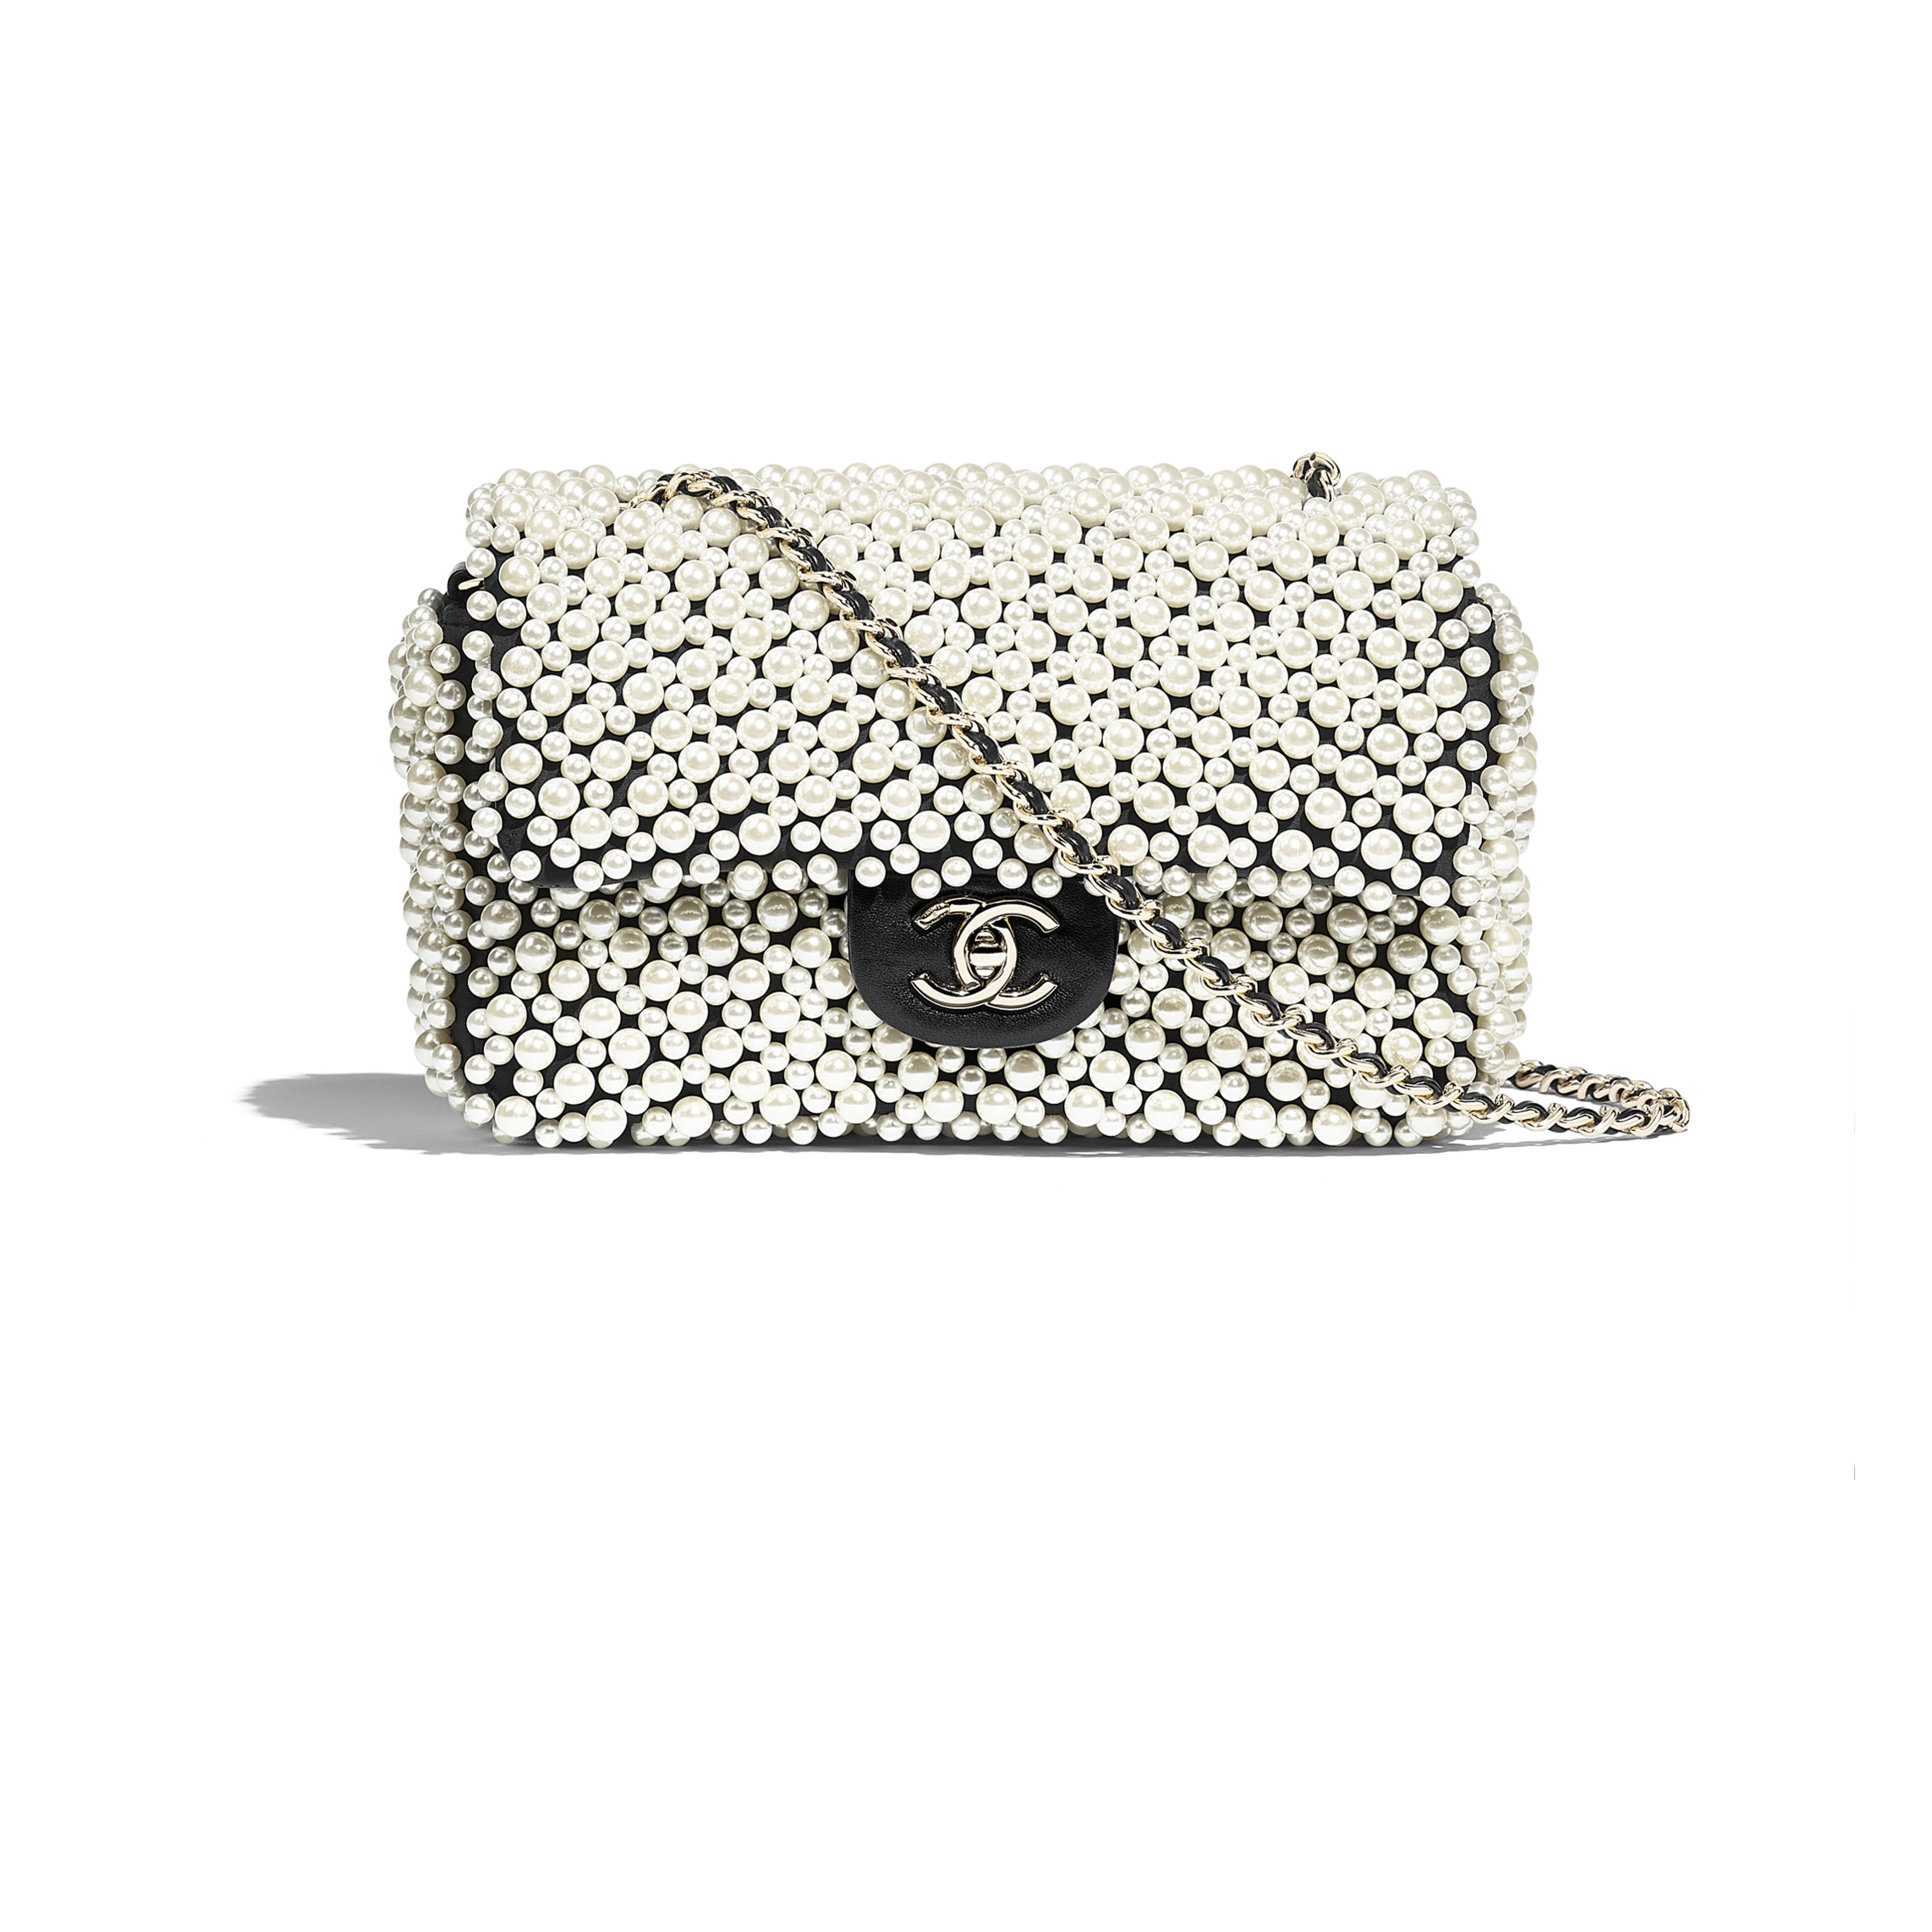 CHANEL  BLACK CHIC PEARLS SMALL FLAP BAG IN GOATSKIN LEATHER WITH MATTE  GOLD HARDWARE  Handbags  Accessories  2020  Sothebys